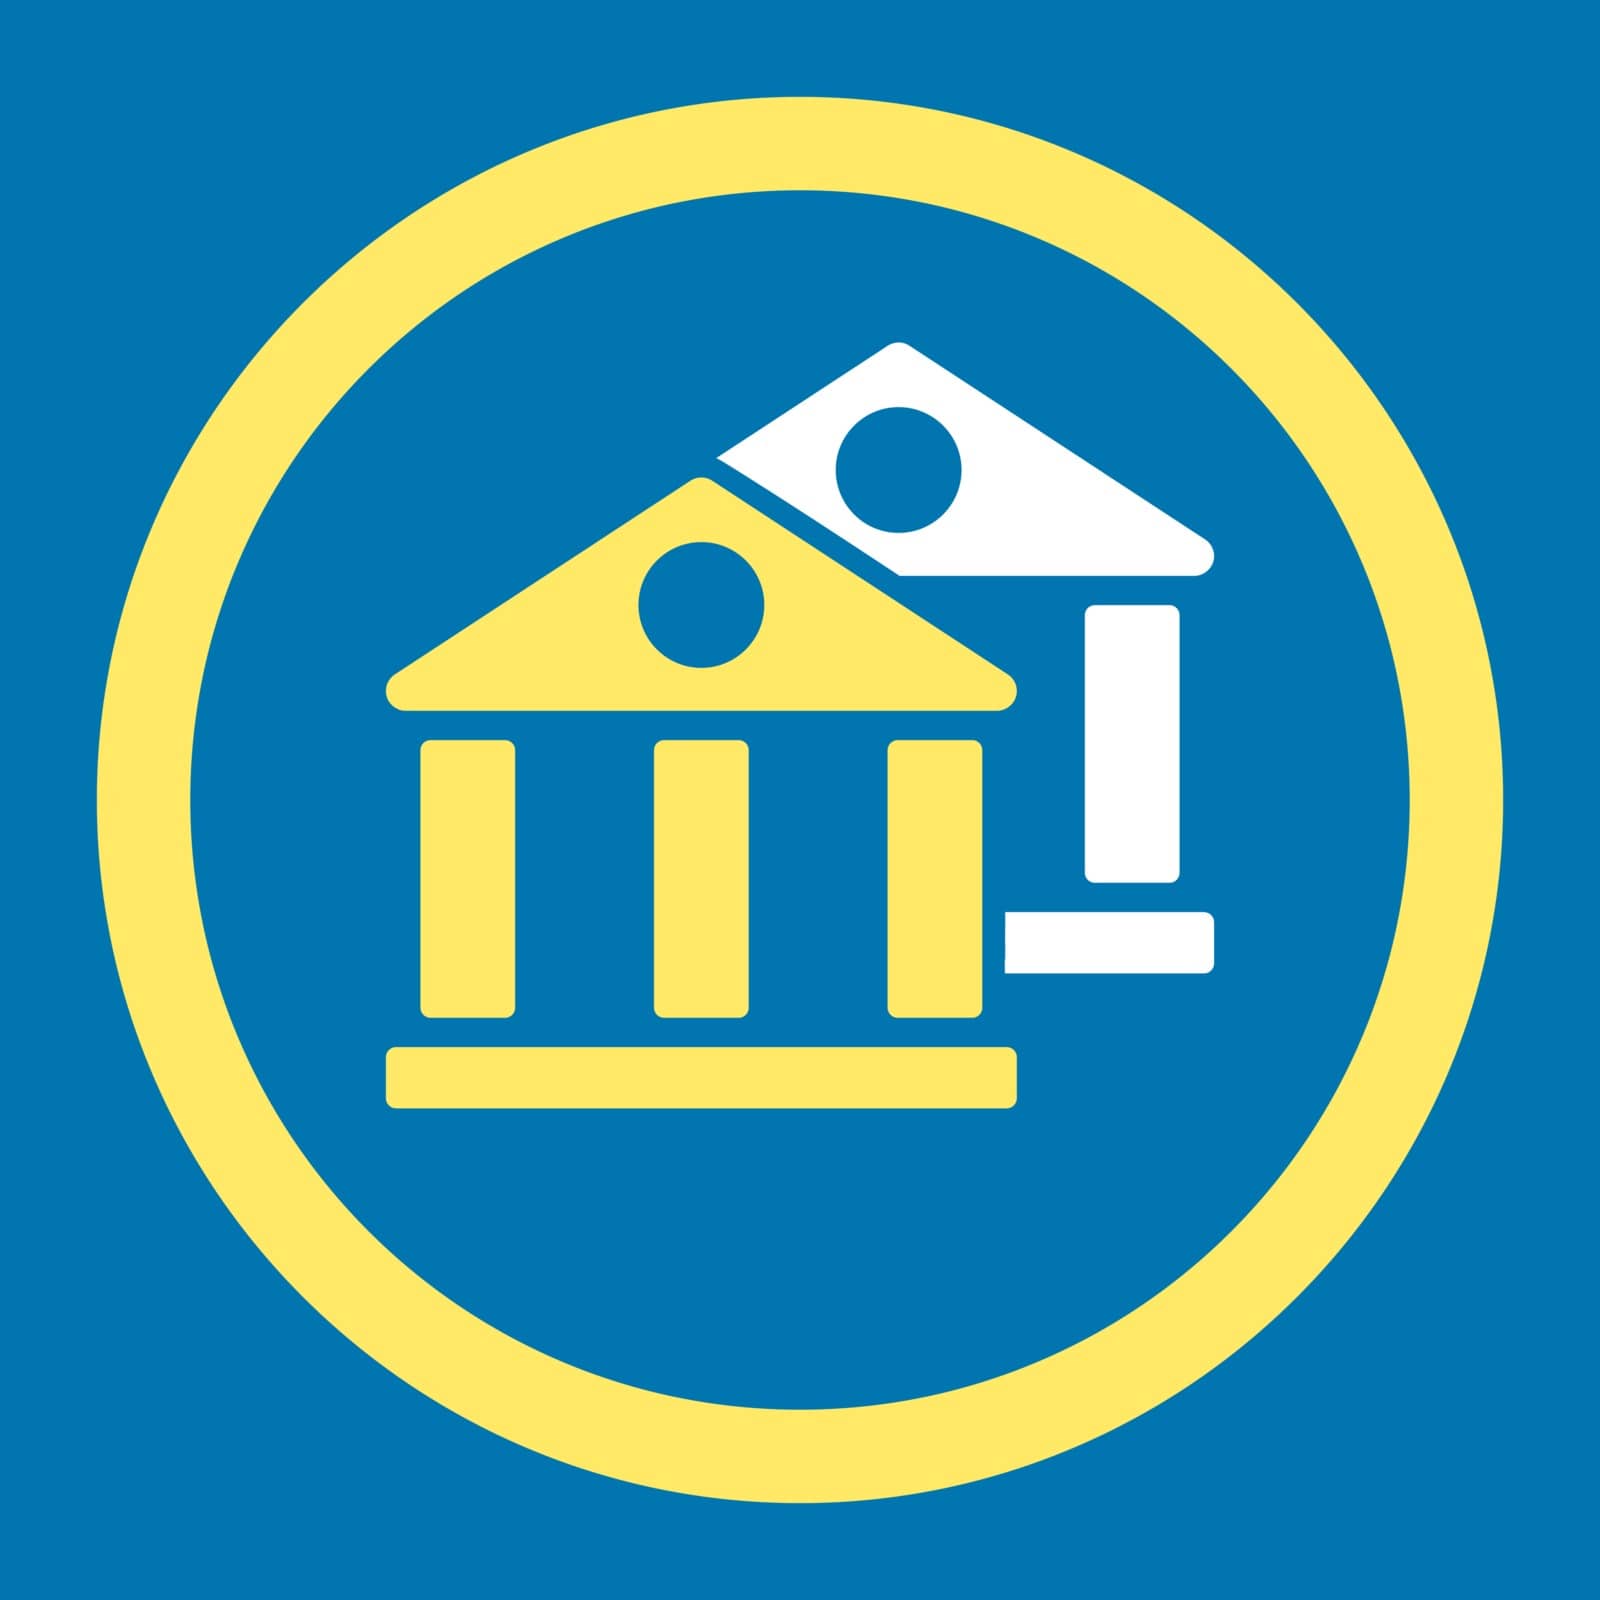 Banks vector icon. This flat rounded symbol uses yellow and white colors and isolated on a blue background.